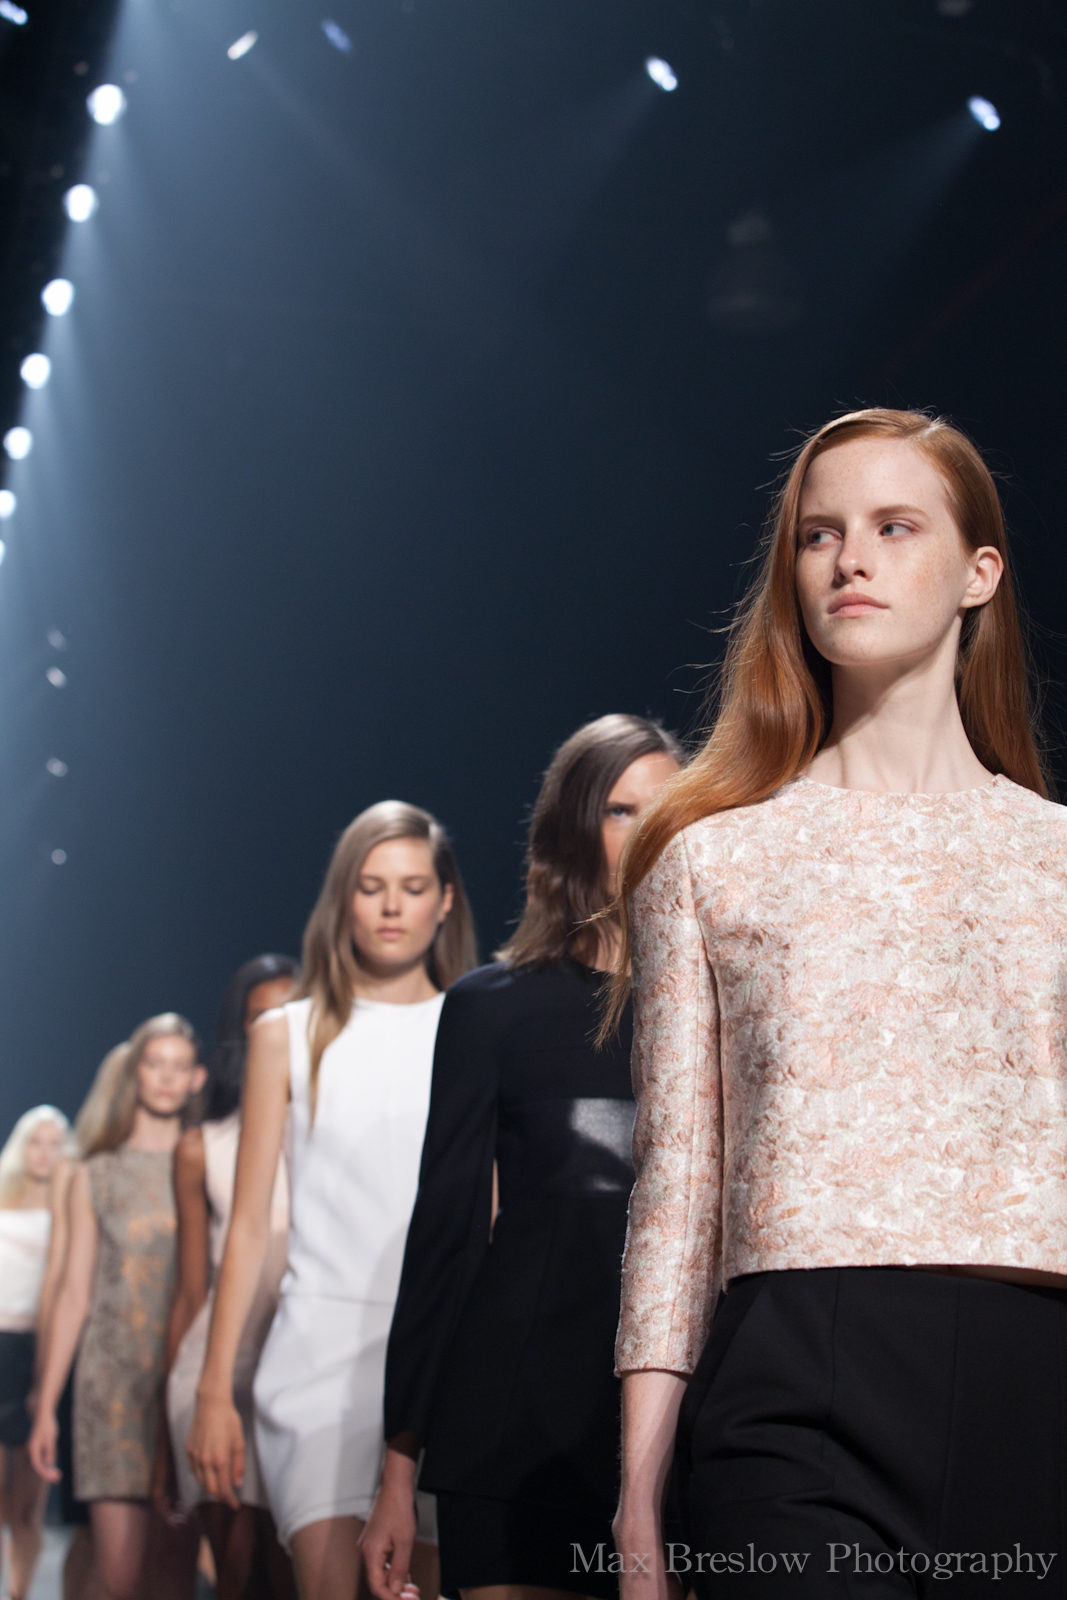  NARCISO RODRIGUEZ - SPRING 2014 SHOW 